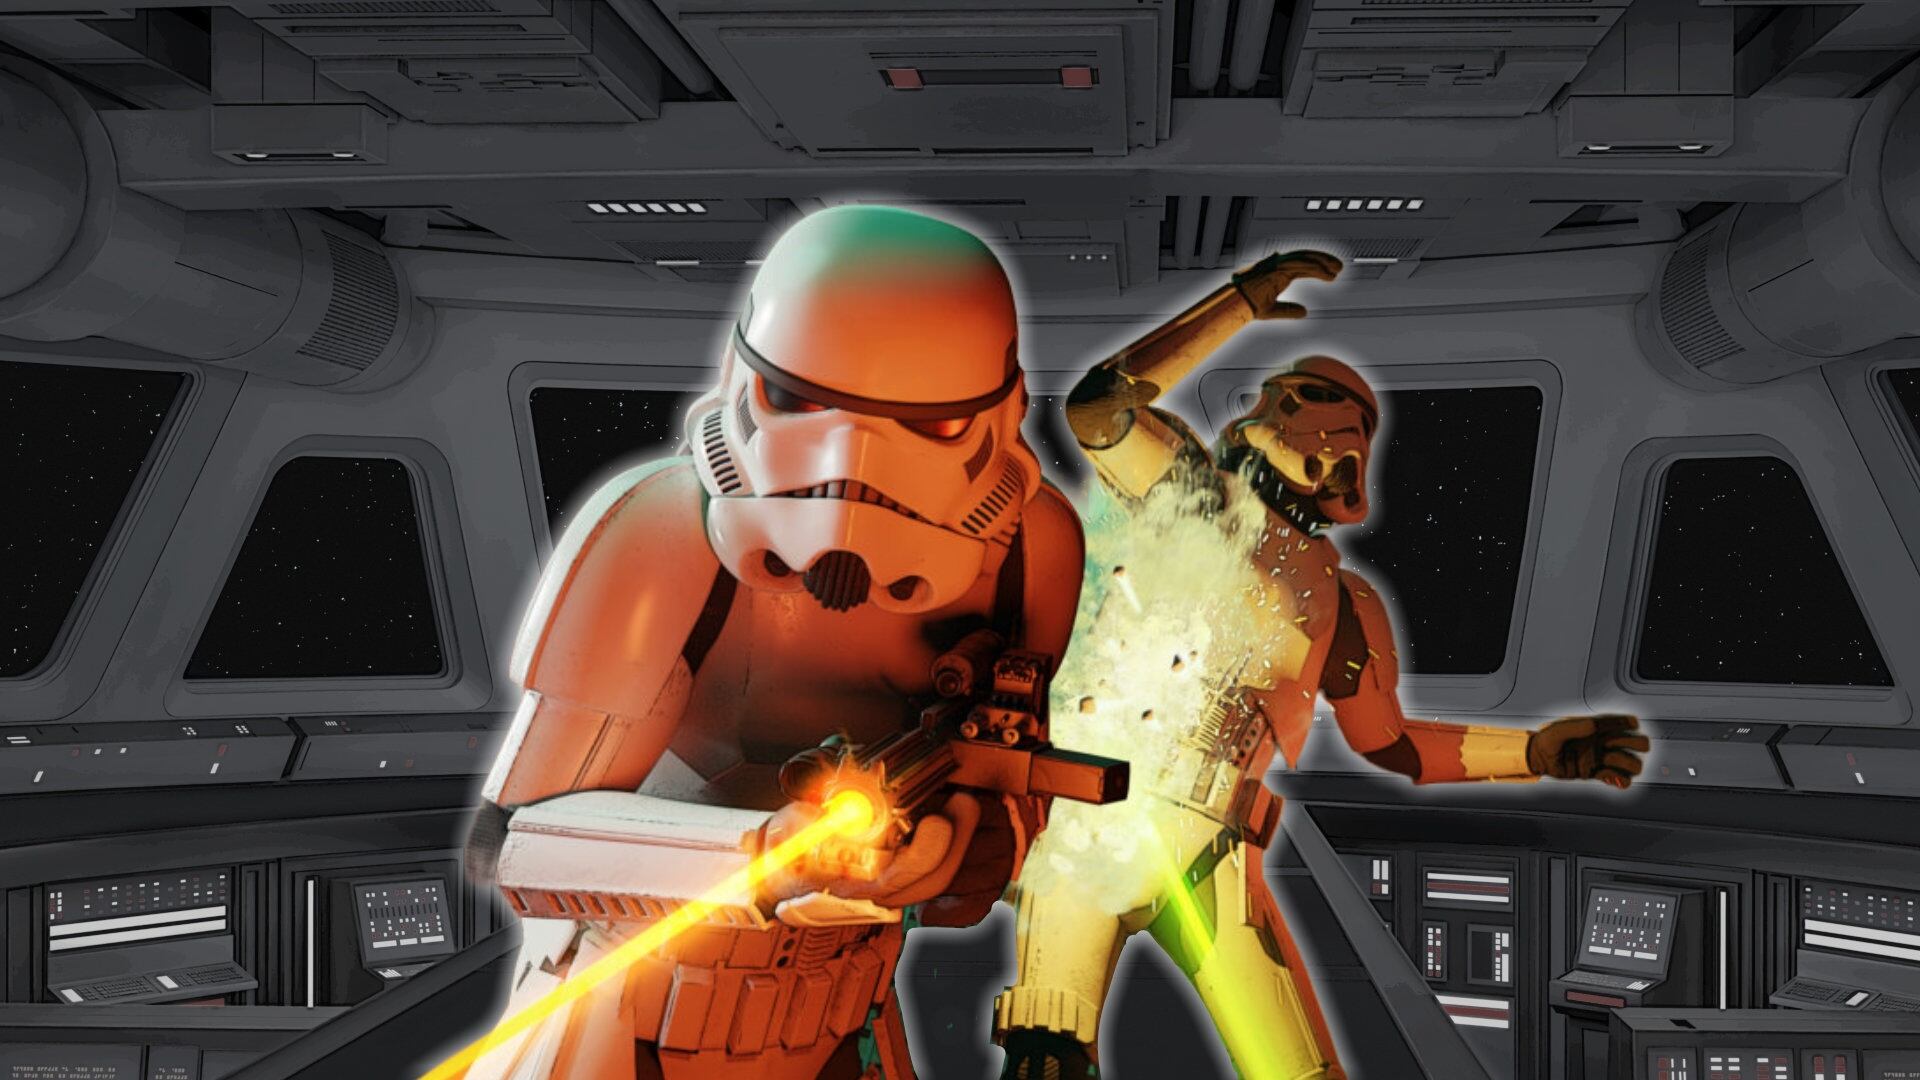 A scene from Star Wars: Dark Forces featuring two Imperial Stormtroopers